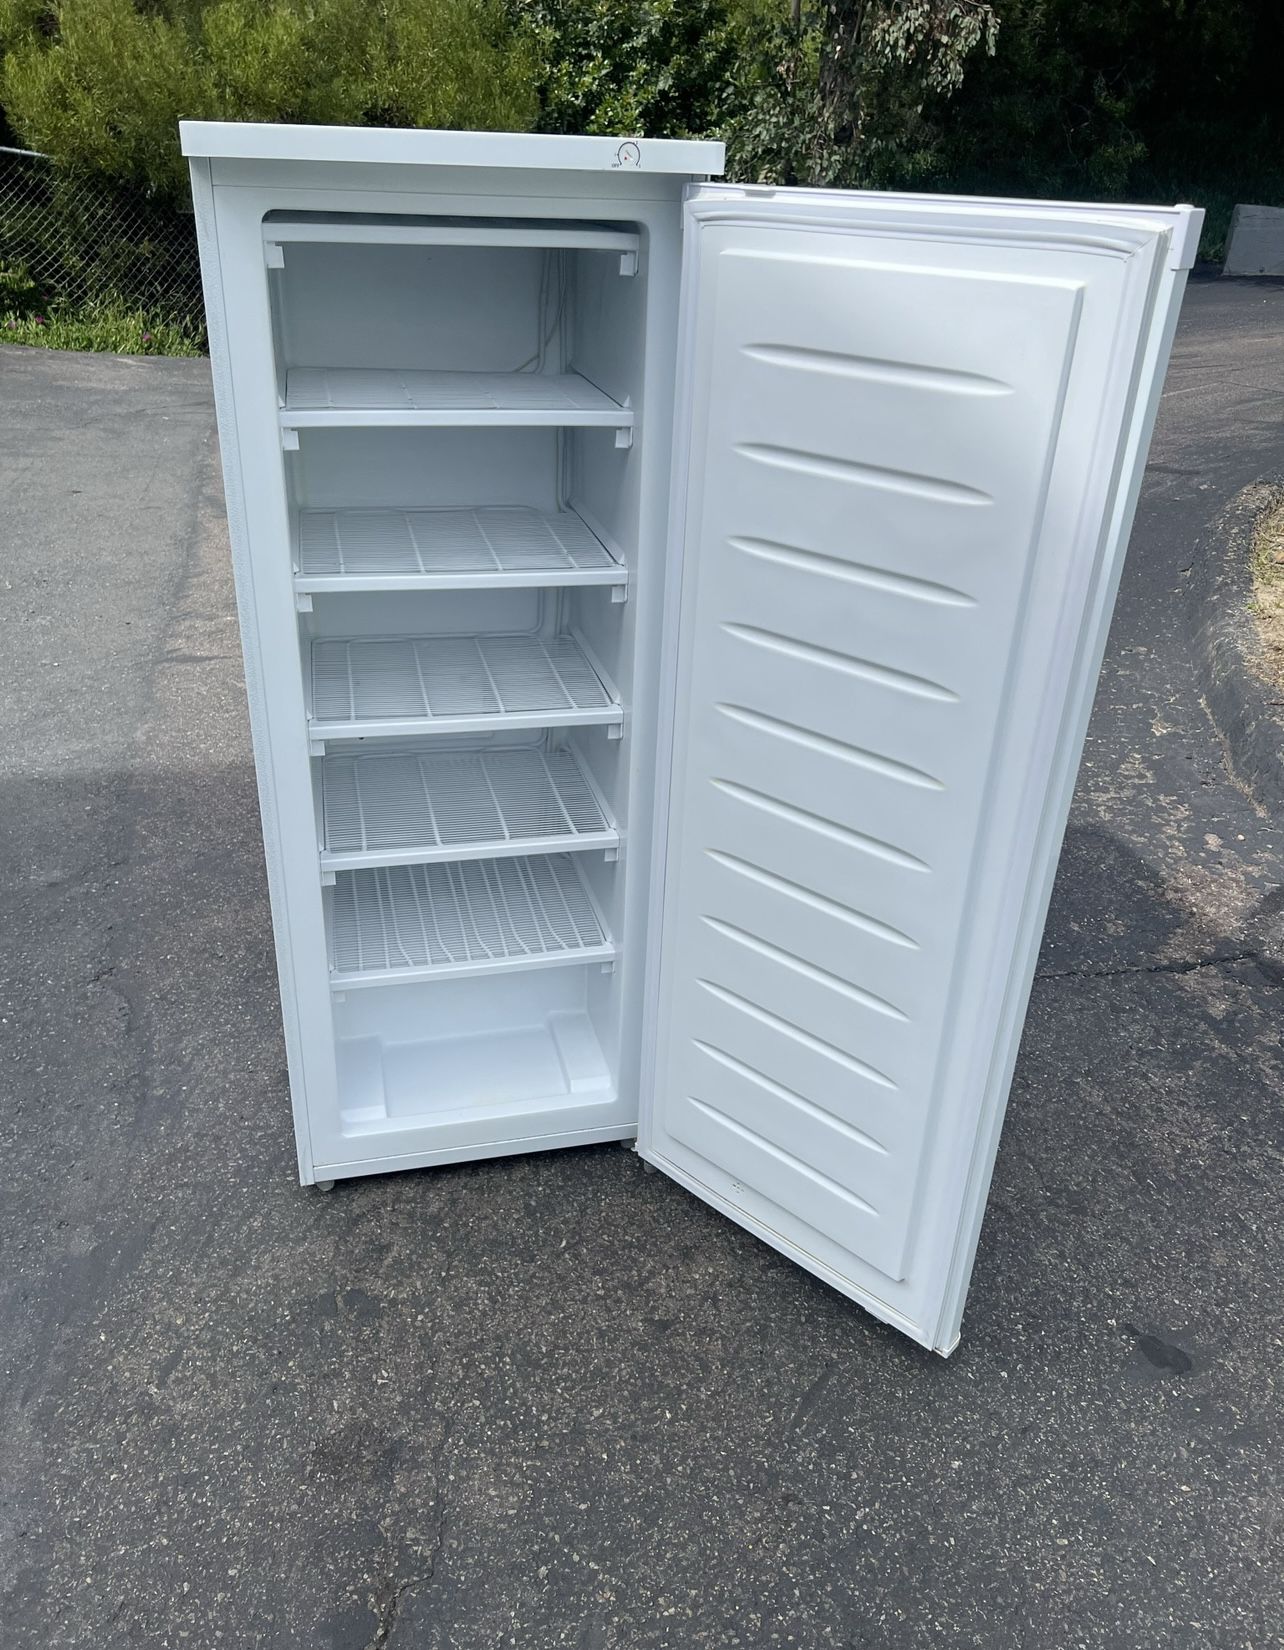 Tall Upright Freezer (free Local Delivery/30 Day Warranty)